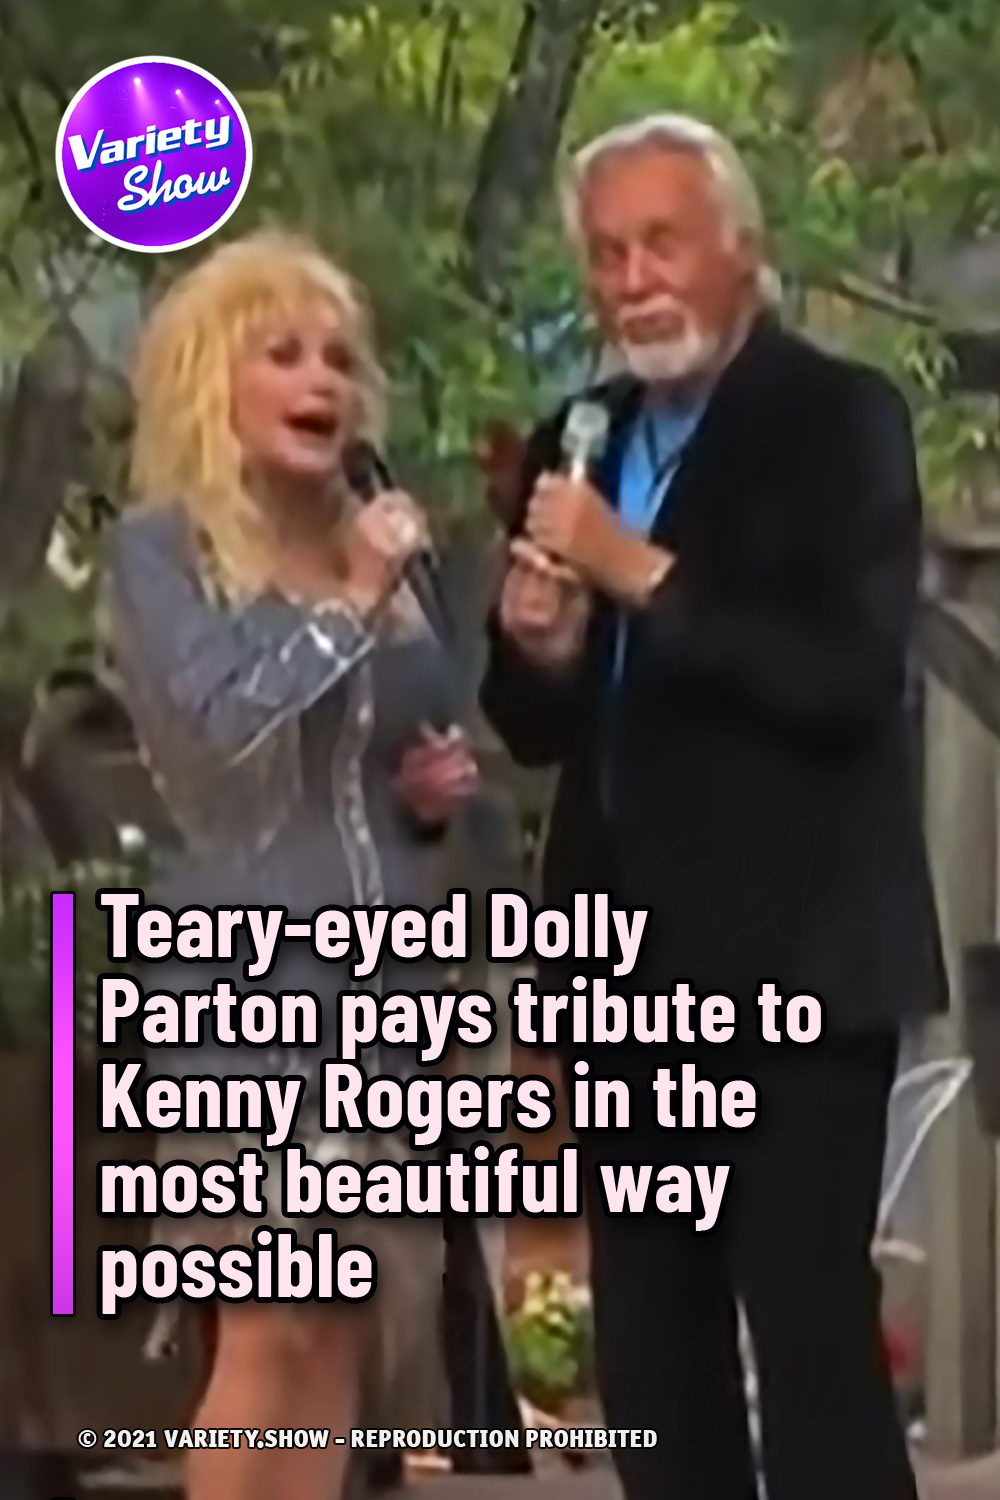 Teary-eyed Dolly Parton pays tribute to Kenny Rogers in the most beautiful way possible